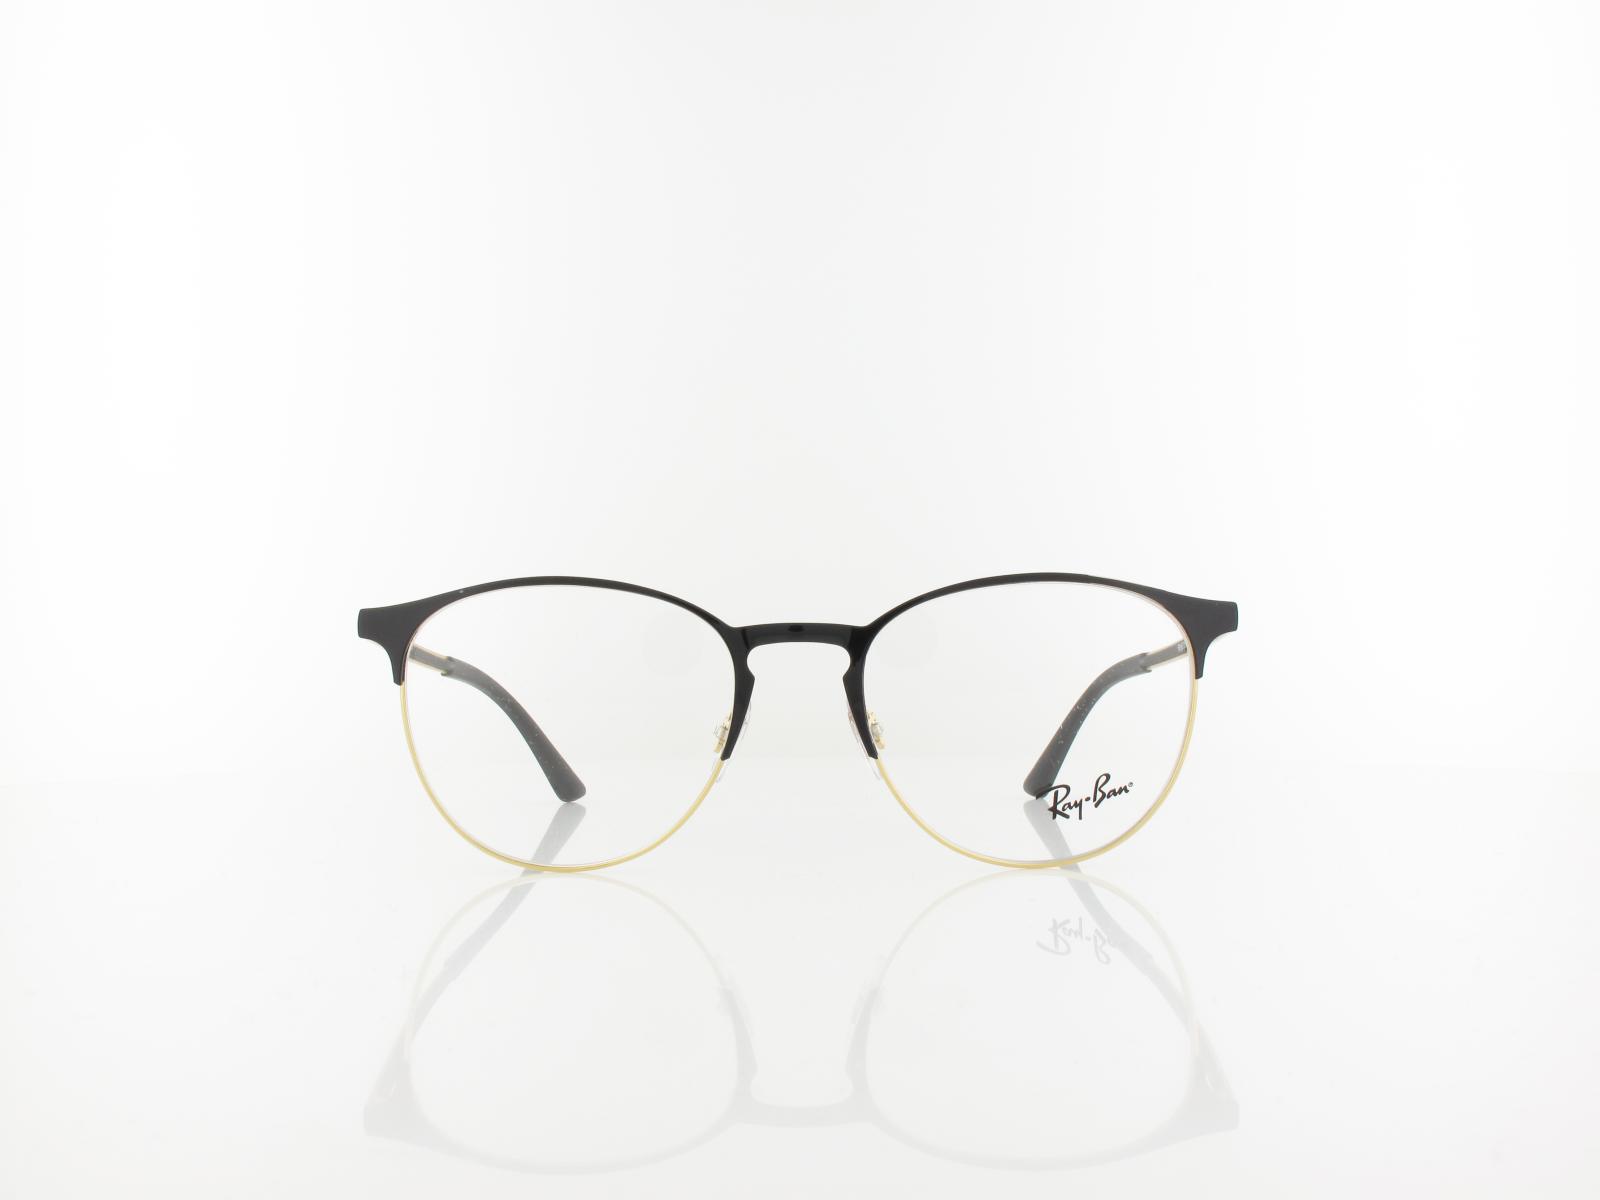 Ray Ban | RX6375 2890 51 | gold top in black